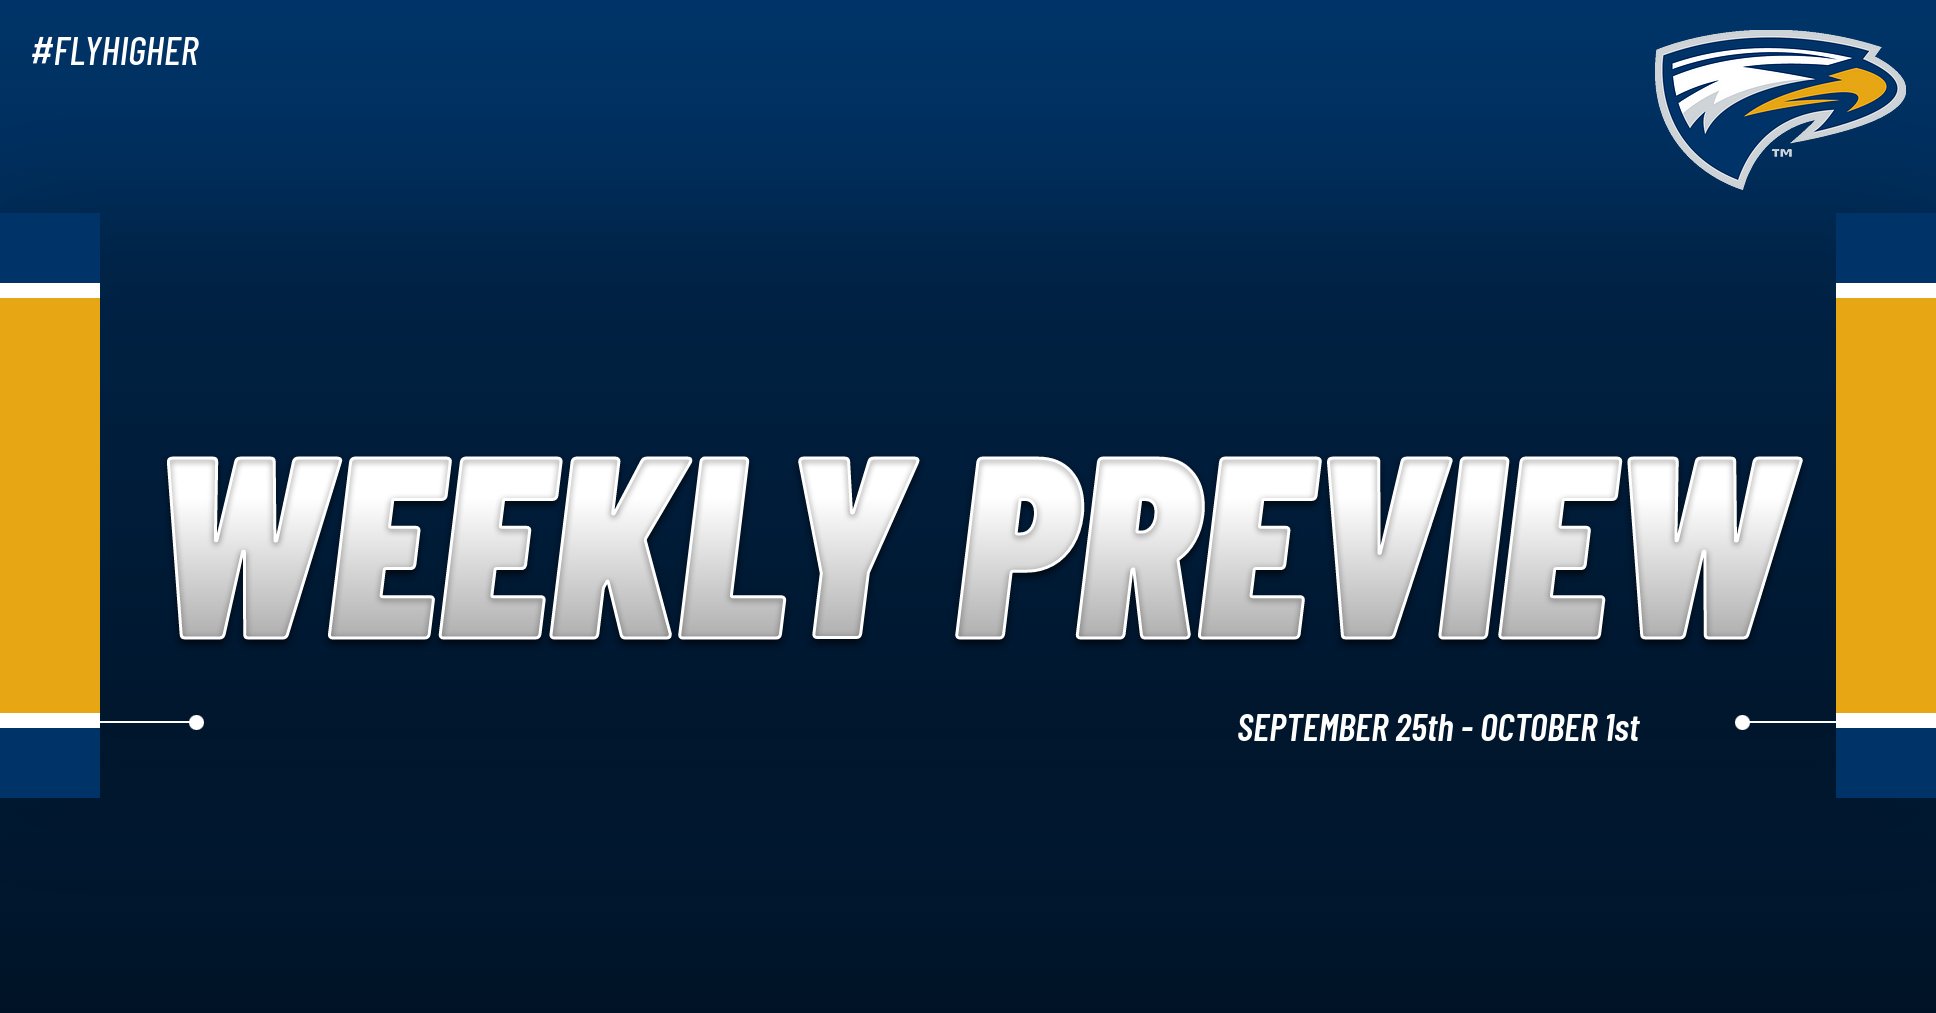 Emory Athletics Weekly Preview: September 25th - October 1st